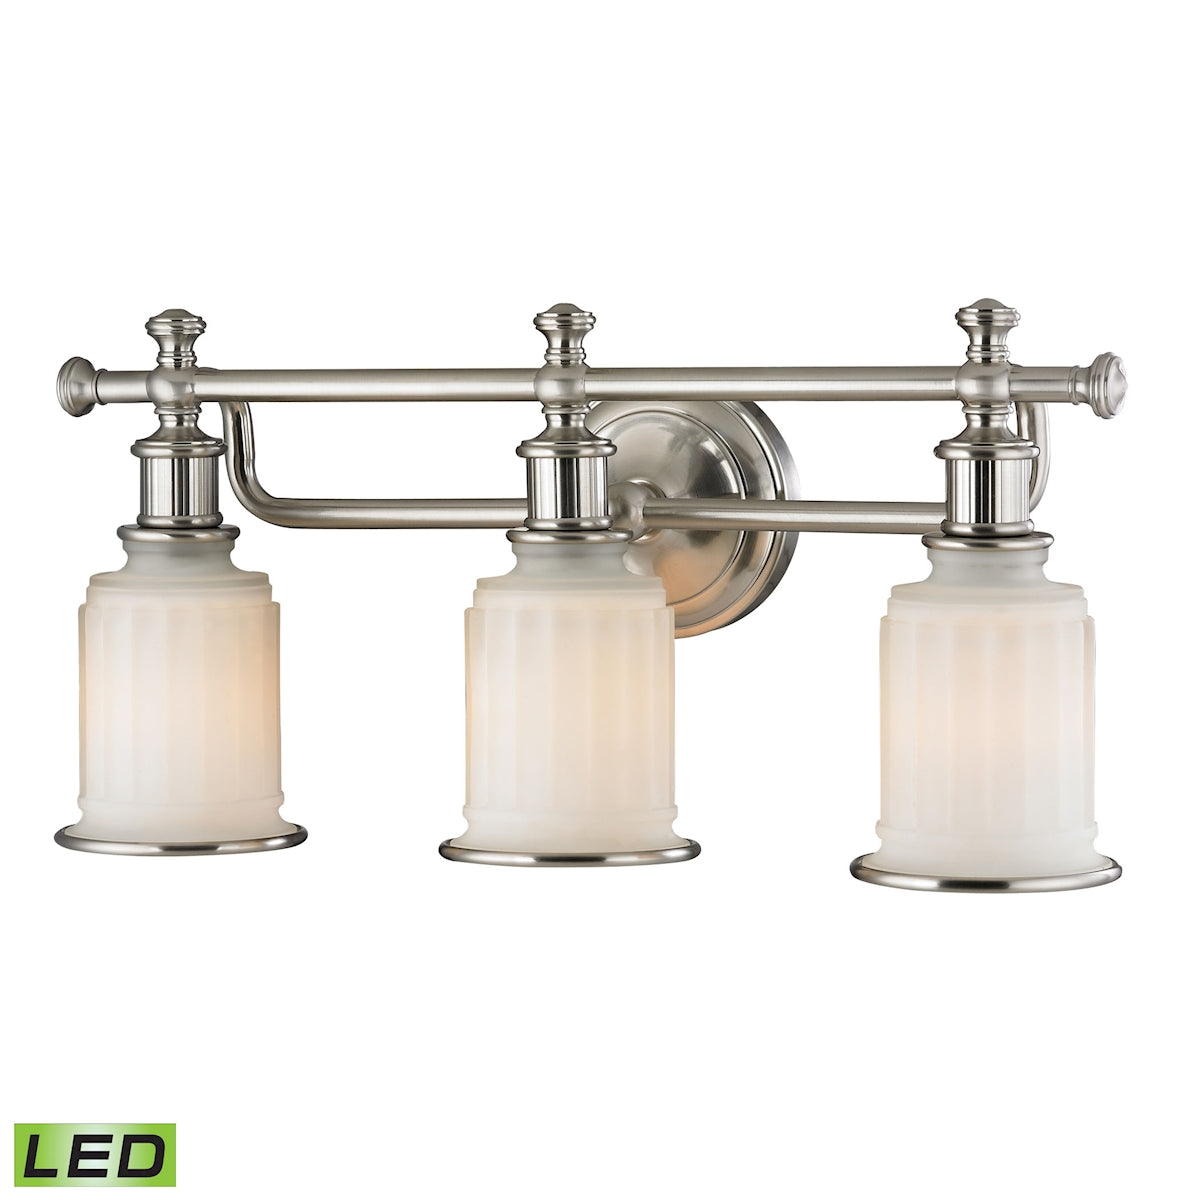 Acadia 3-Light Vanity Lamp in Brushed Nickel with Opal Reeded Pressed Glass - Includes LED Bulbs